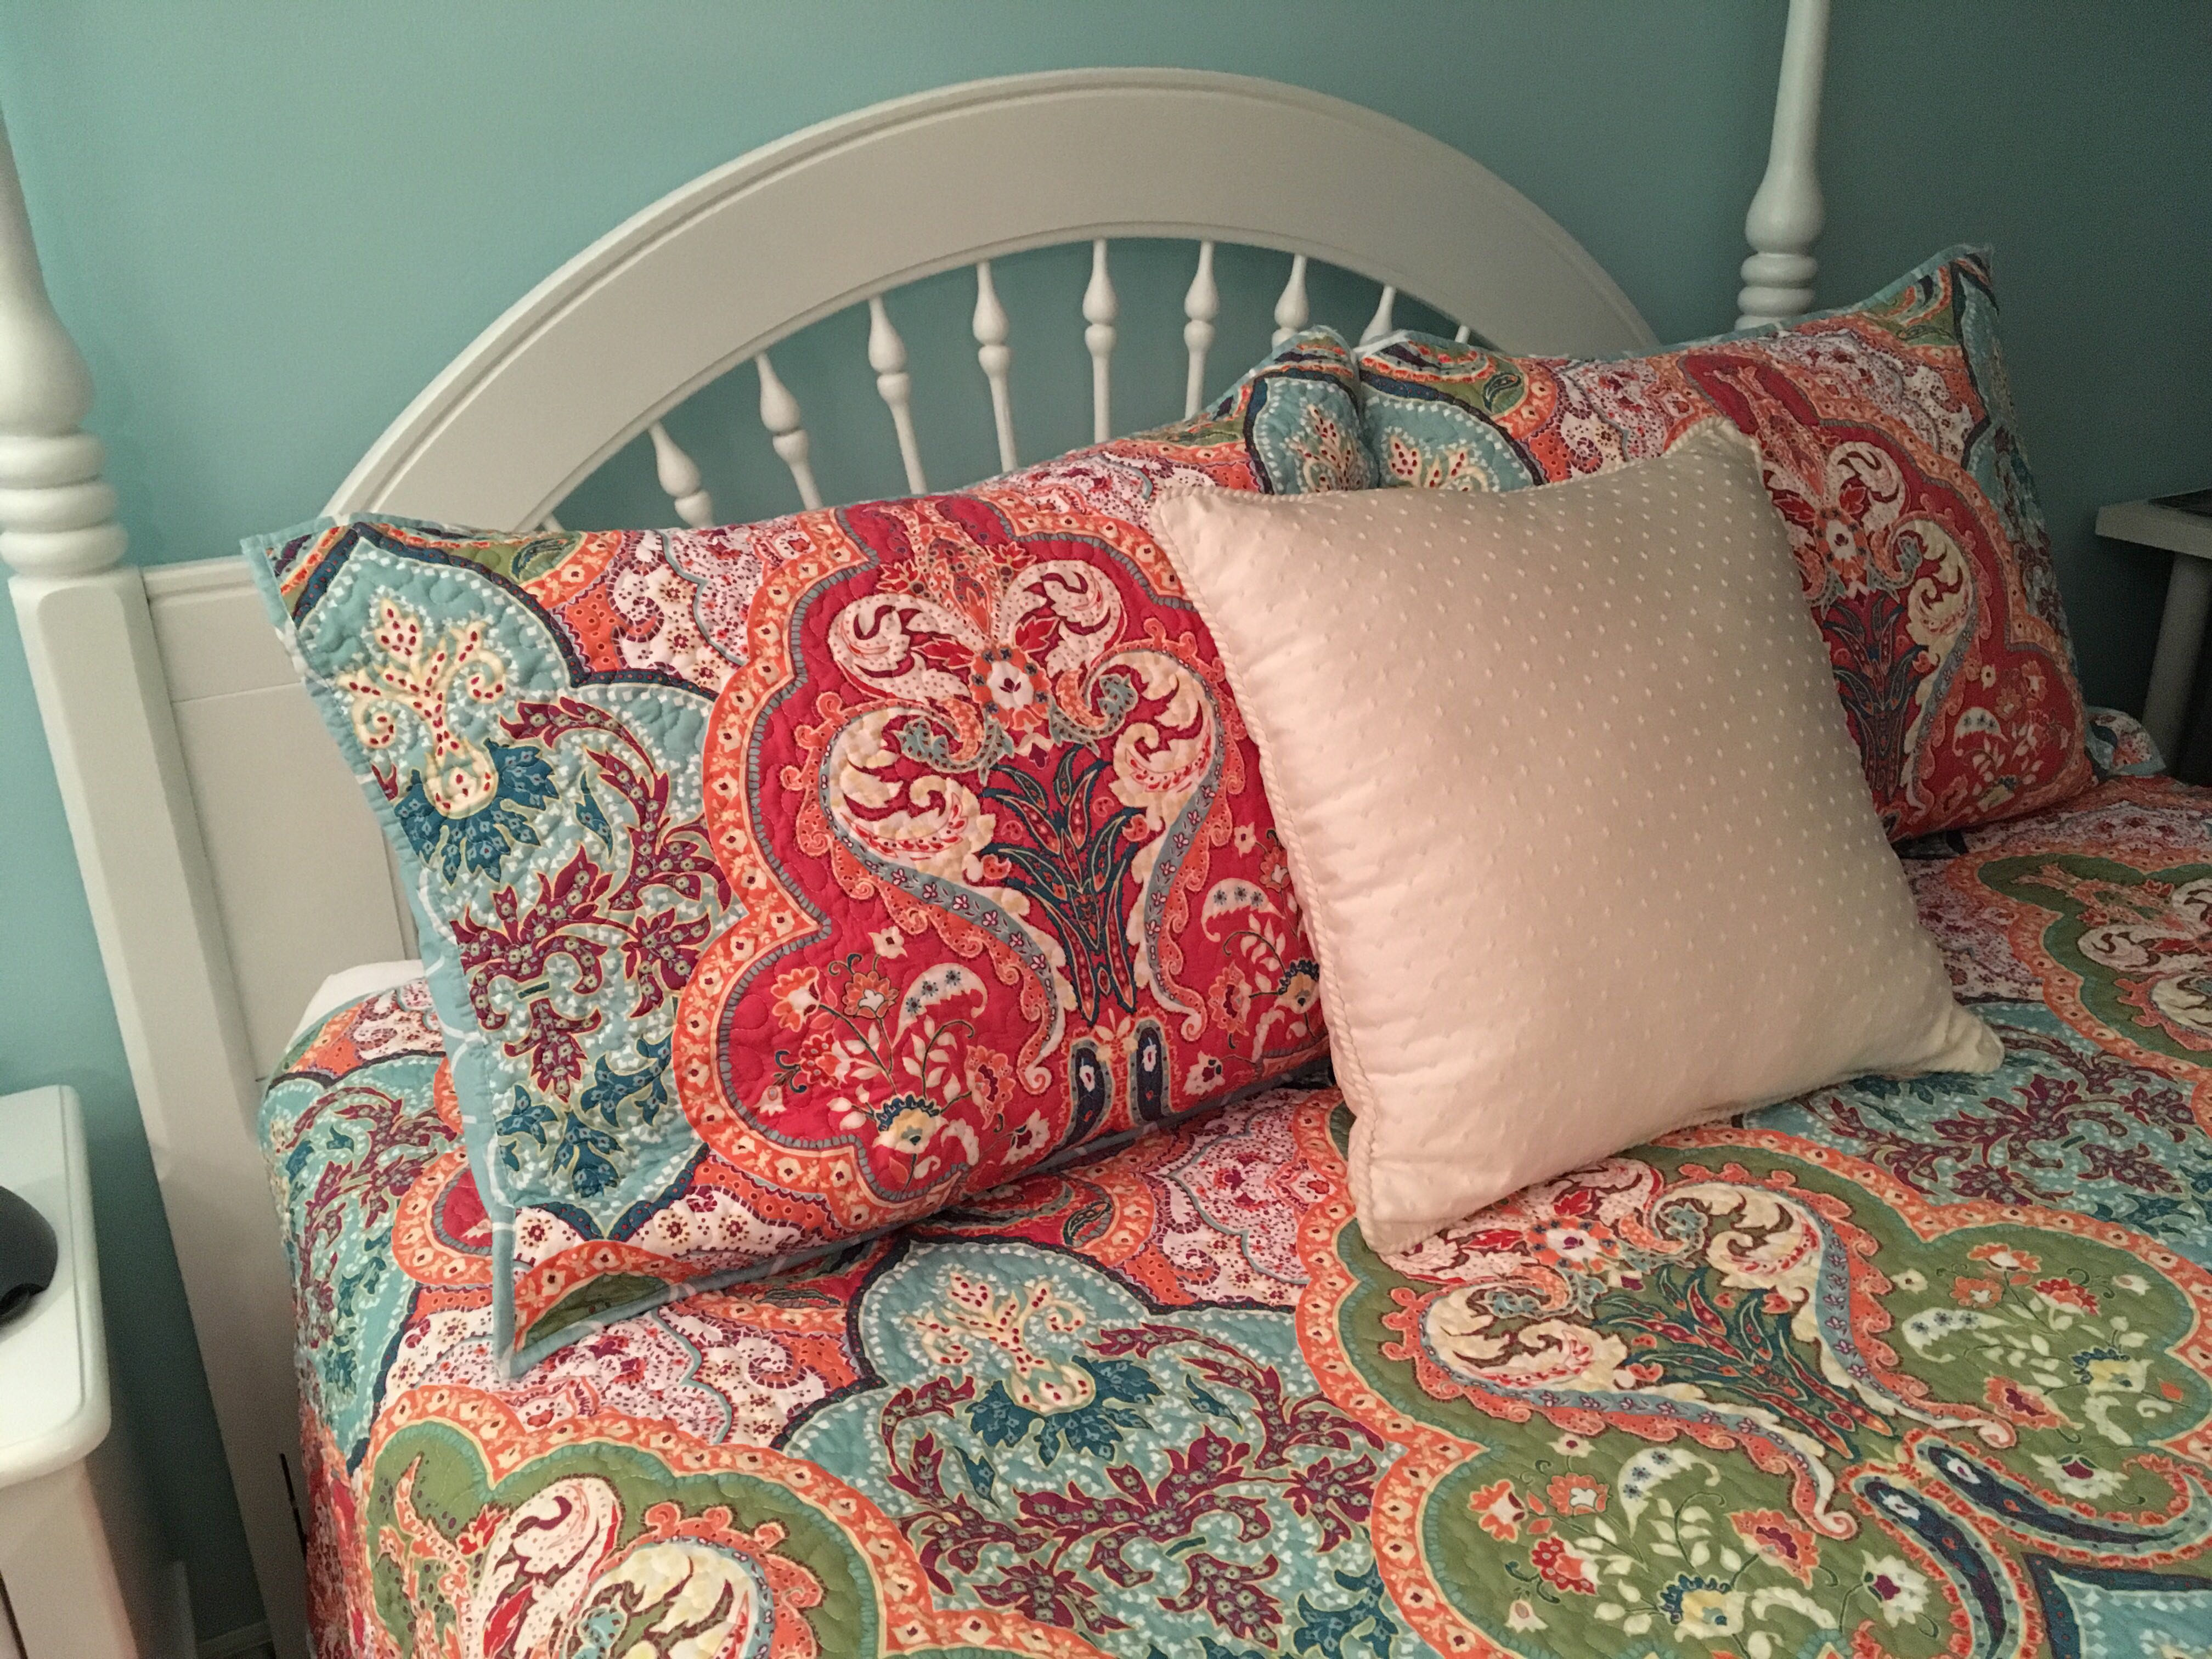 Showcasing a bedroom redesign with new furniture, paint, and indoor décor.